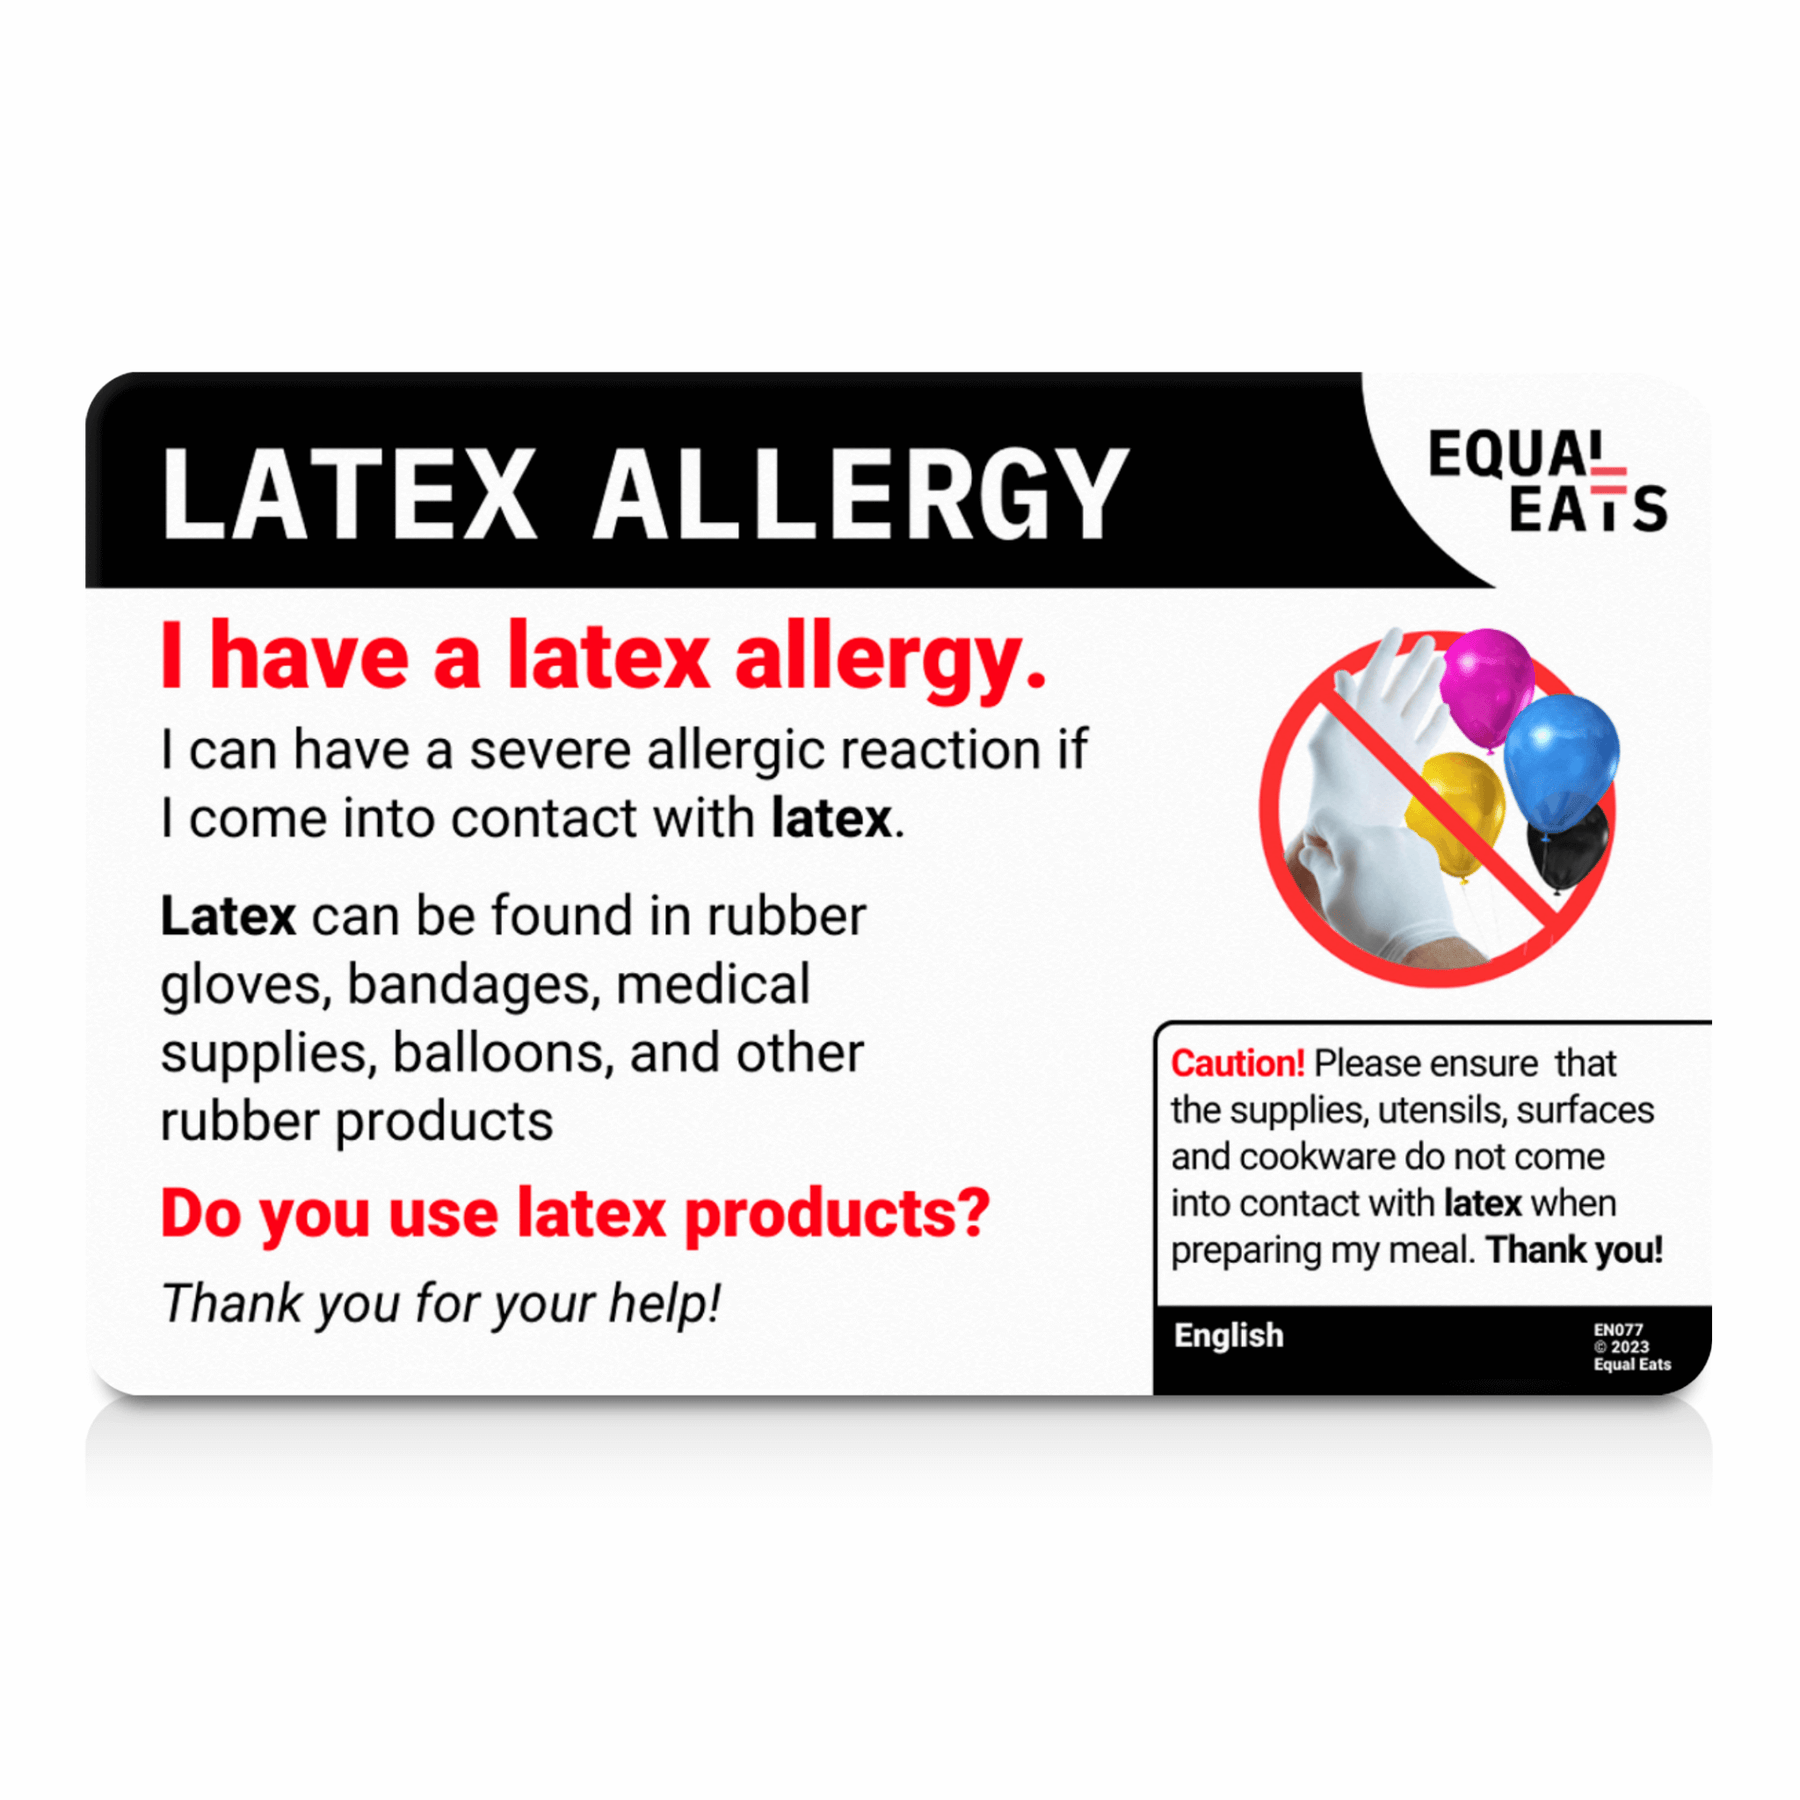 English Latex Allergy Card  Communicate Latex Allergy – Equal Eats